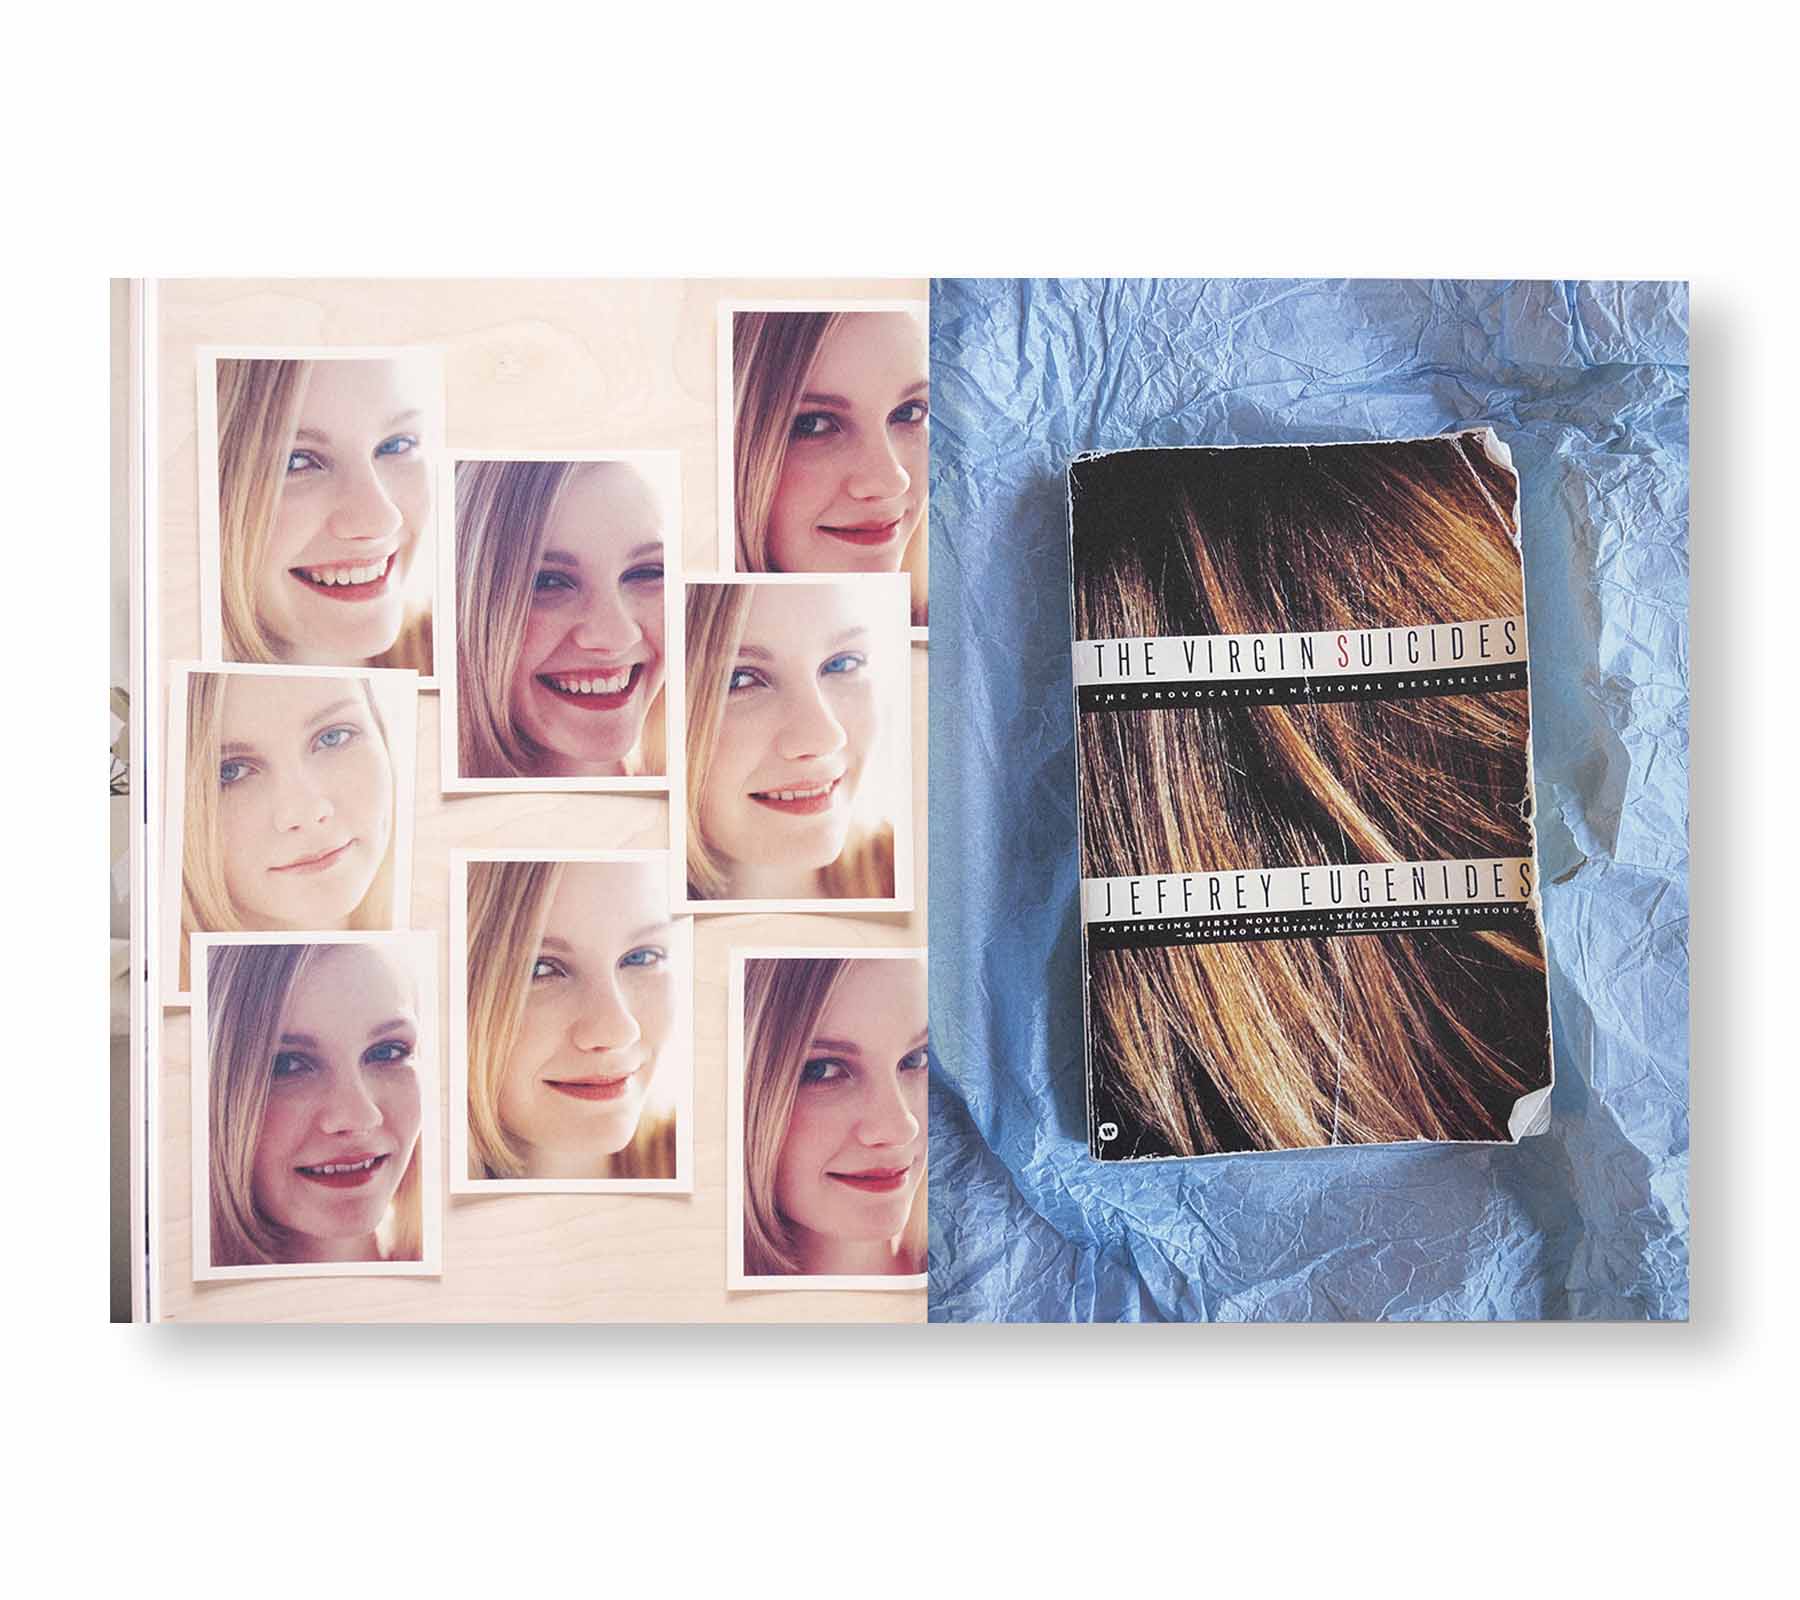 ARCHIVE by Sofia Coppola [SPECIAL EDITION]